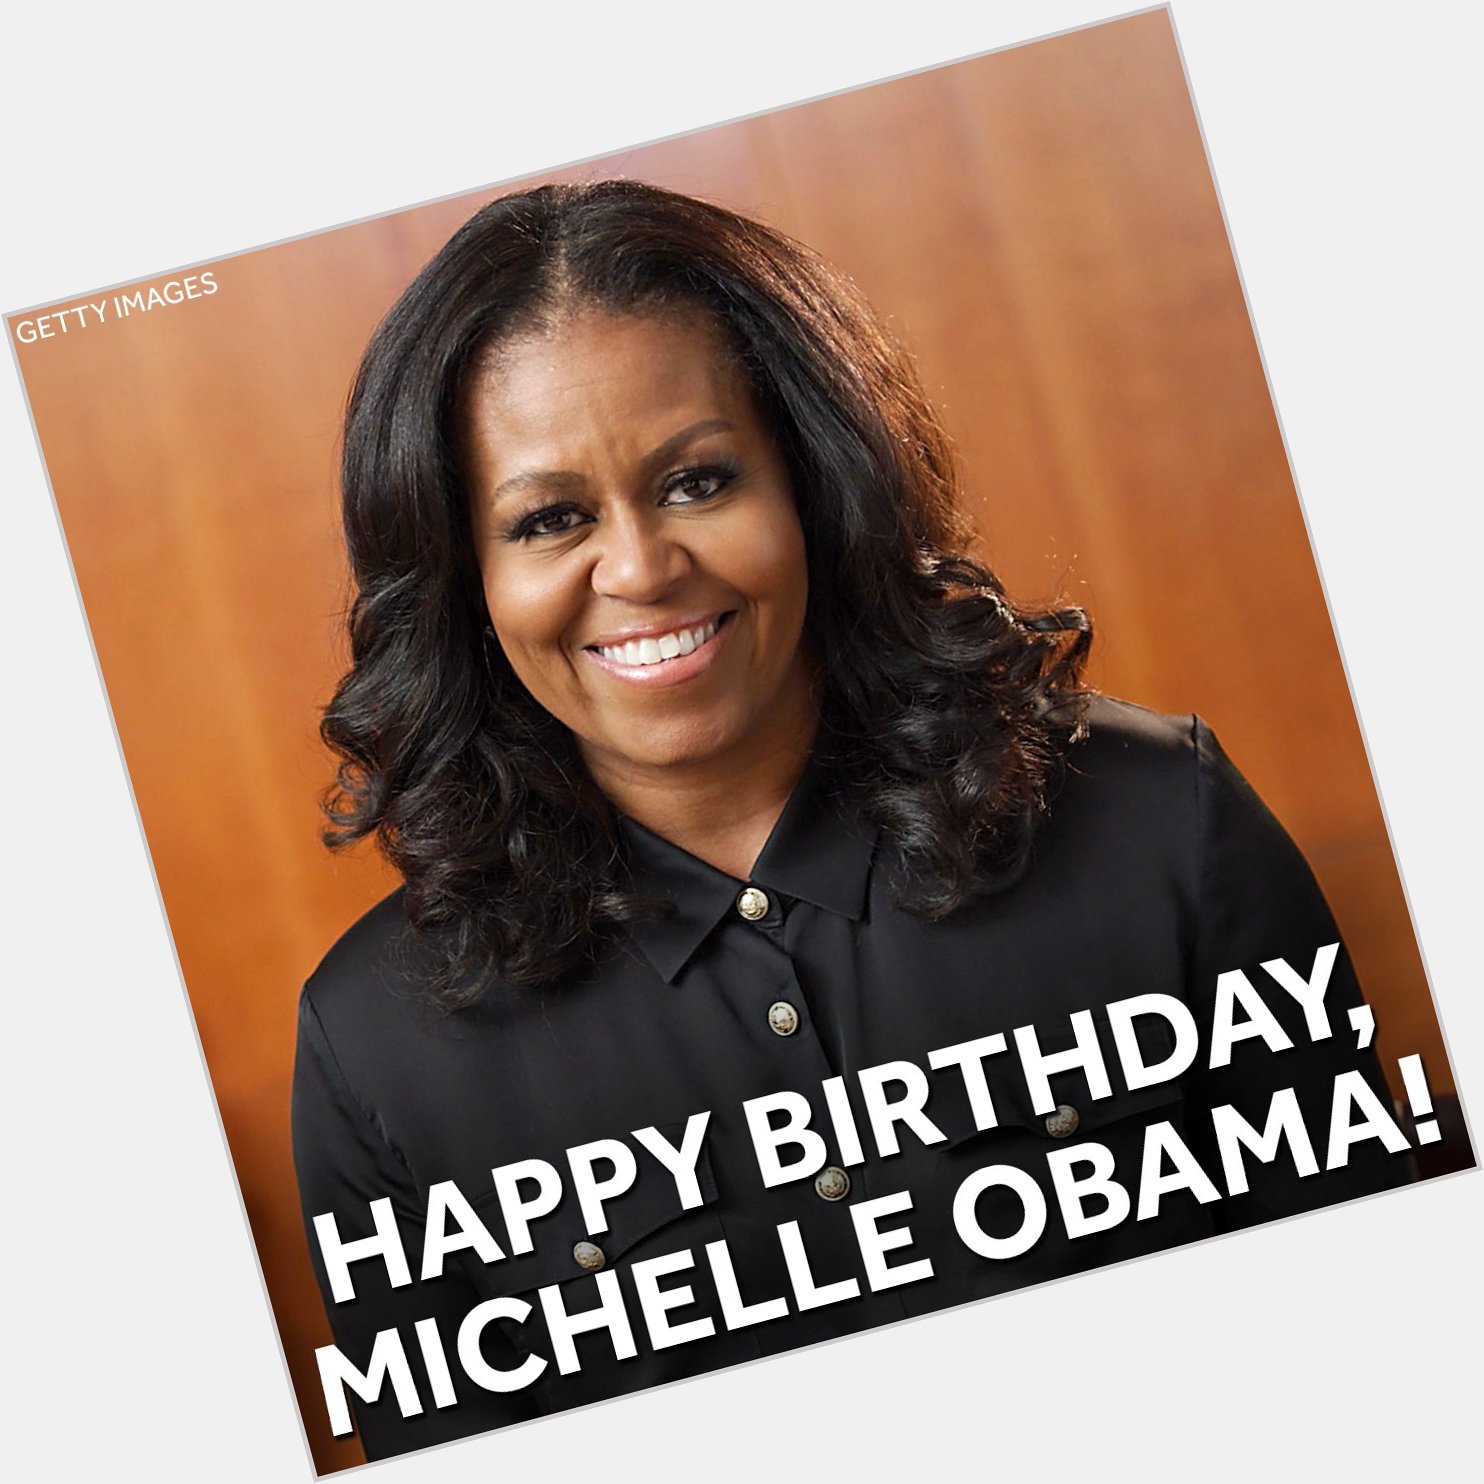  HAPPY BIRTHDAY! Michelle Obama, the former First Lady of the United States, turns 58 today! 